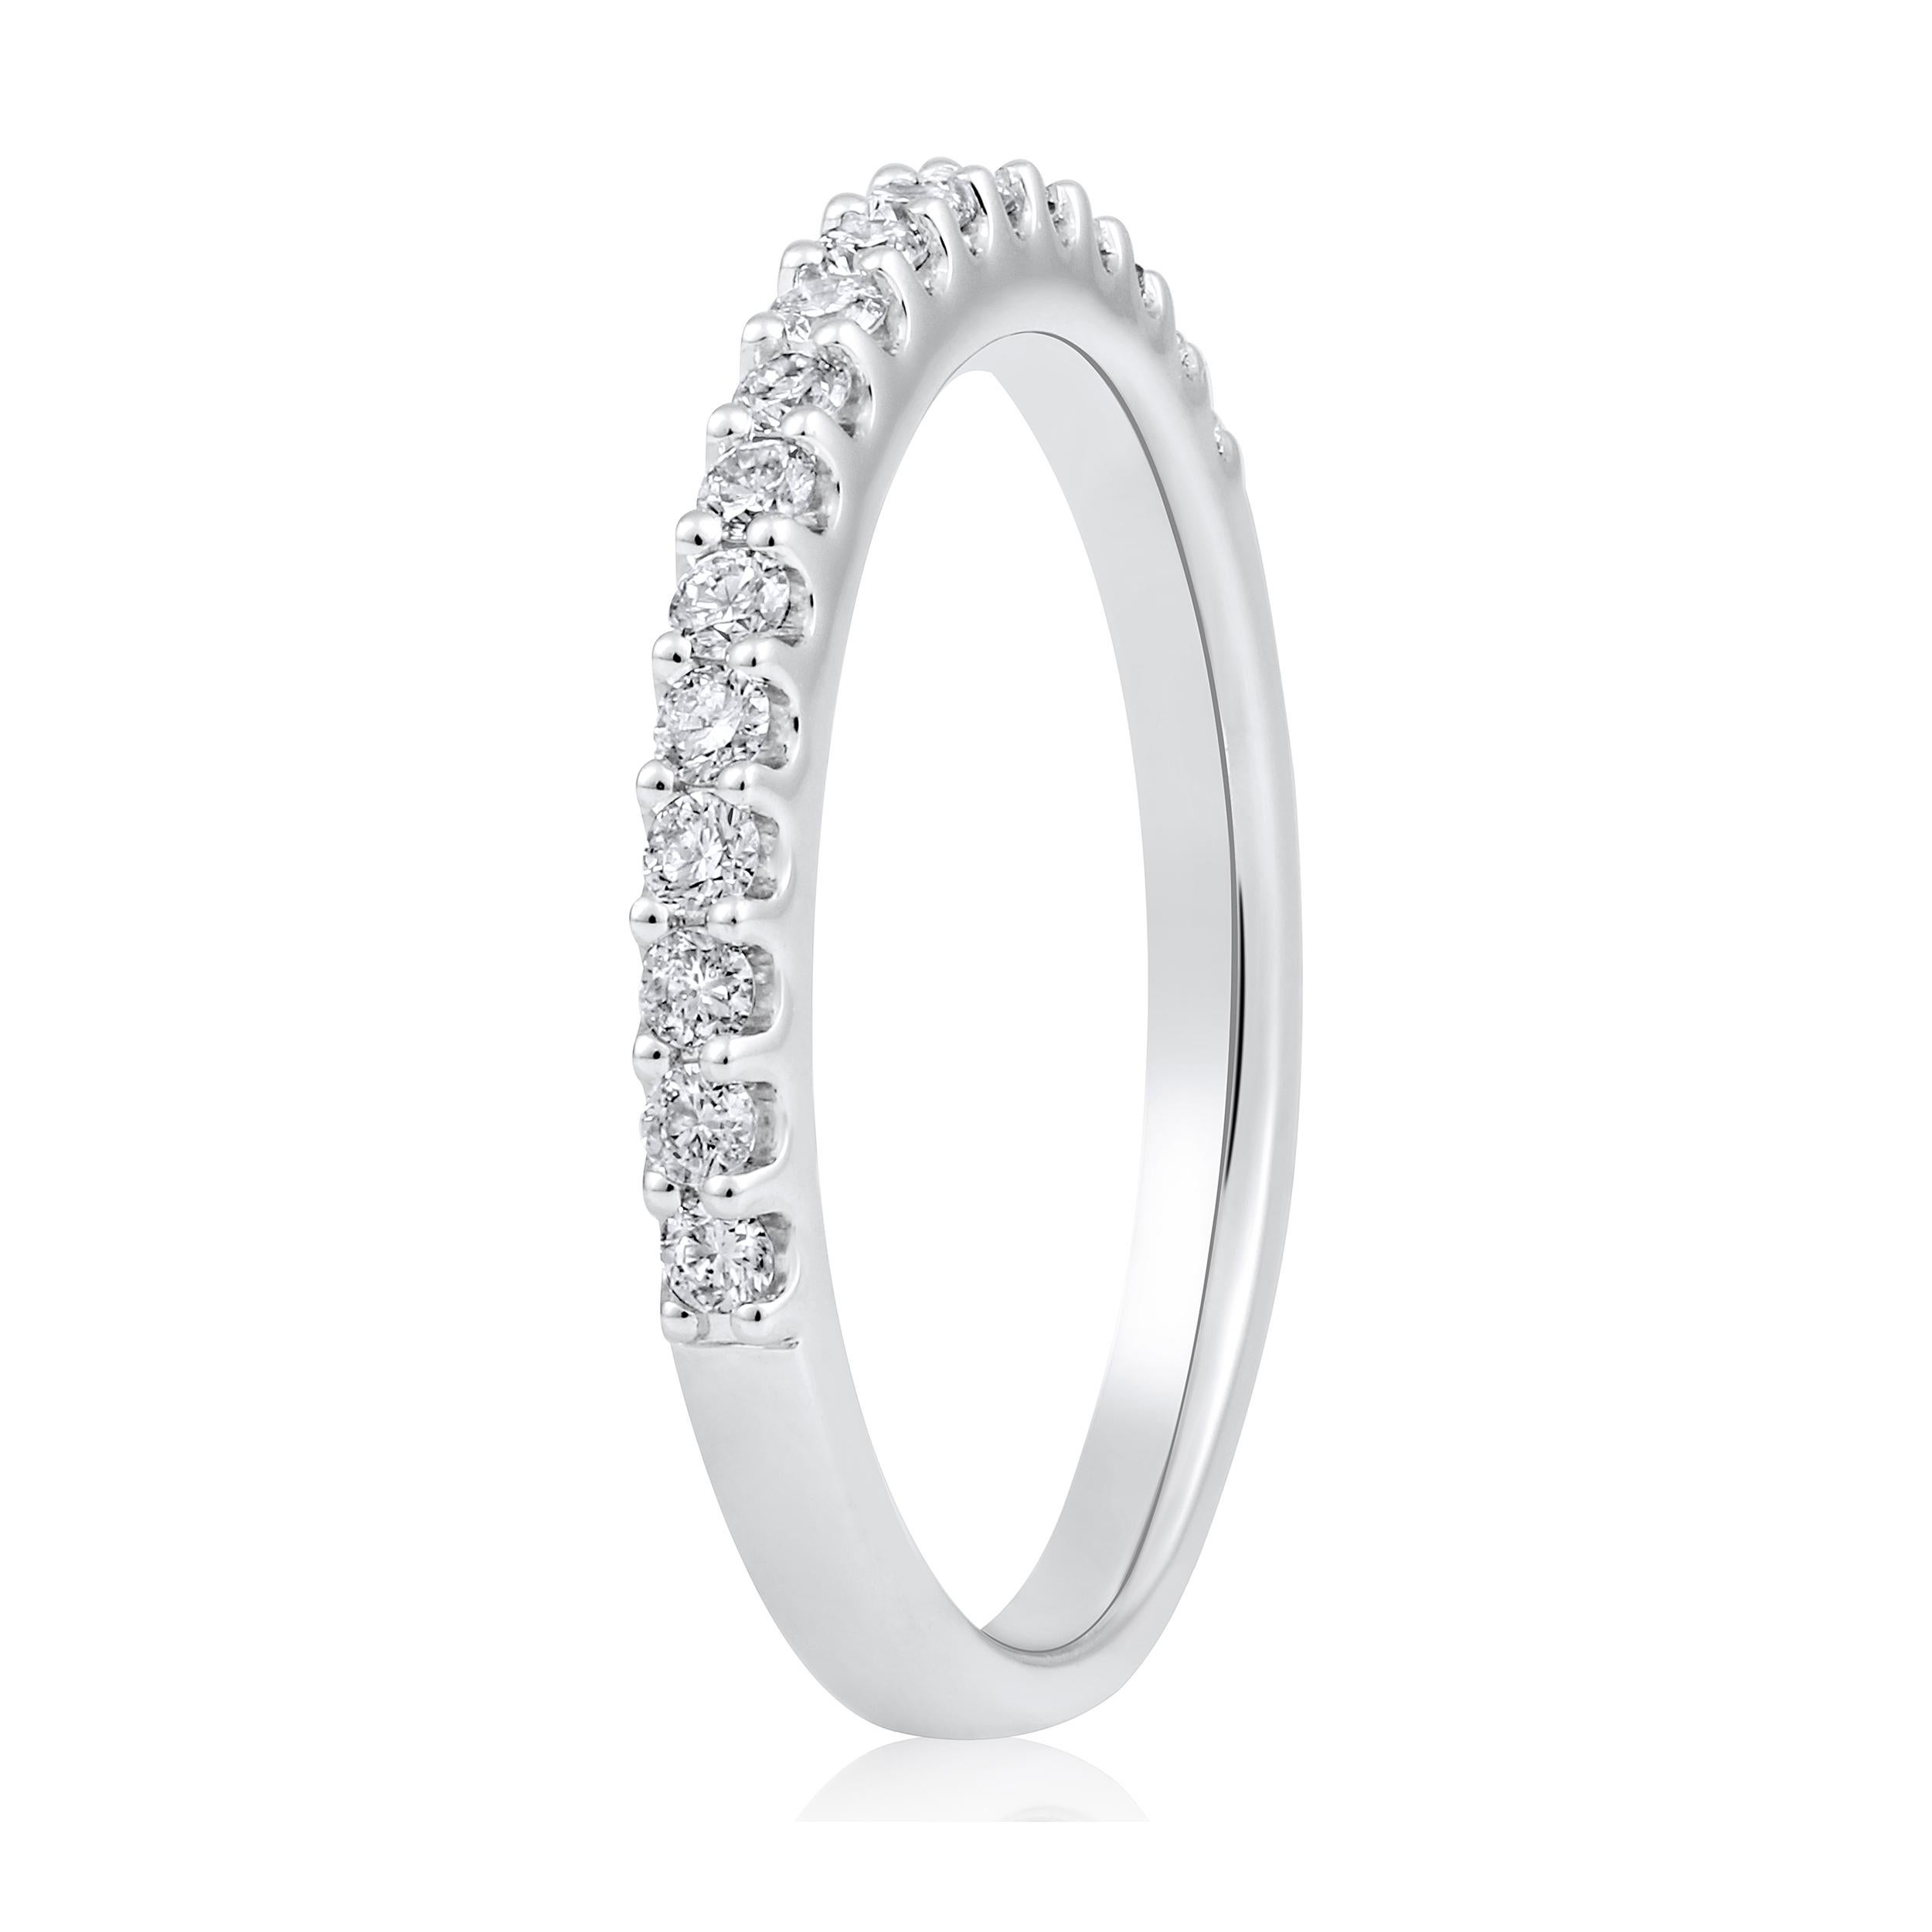 Ring Size: US 7 

Crafted in 2.25 grams of 14K White Gold, the ring contains 17 stones of Round Diamonds with a total of 0.31 carat in G-H color and SI clarity.

CONTEMPORARY AND TIMELESS ESSENCE: Crafted in 14-karat/18-karat with 100% natural